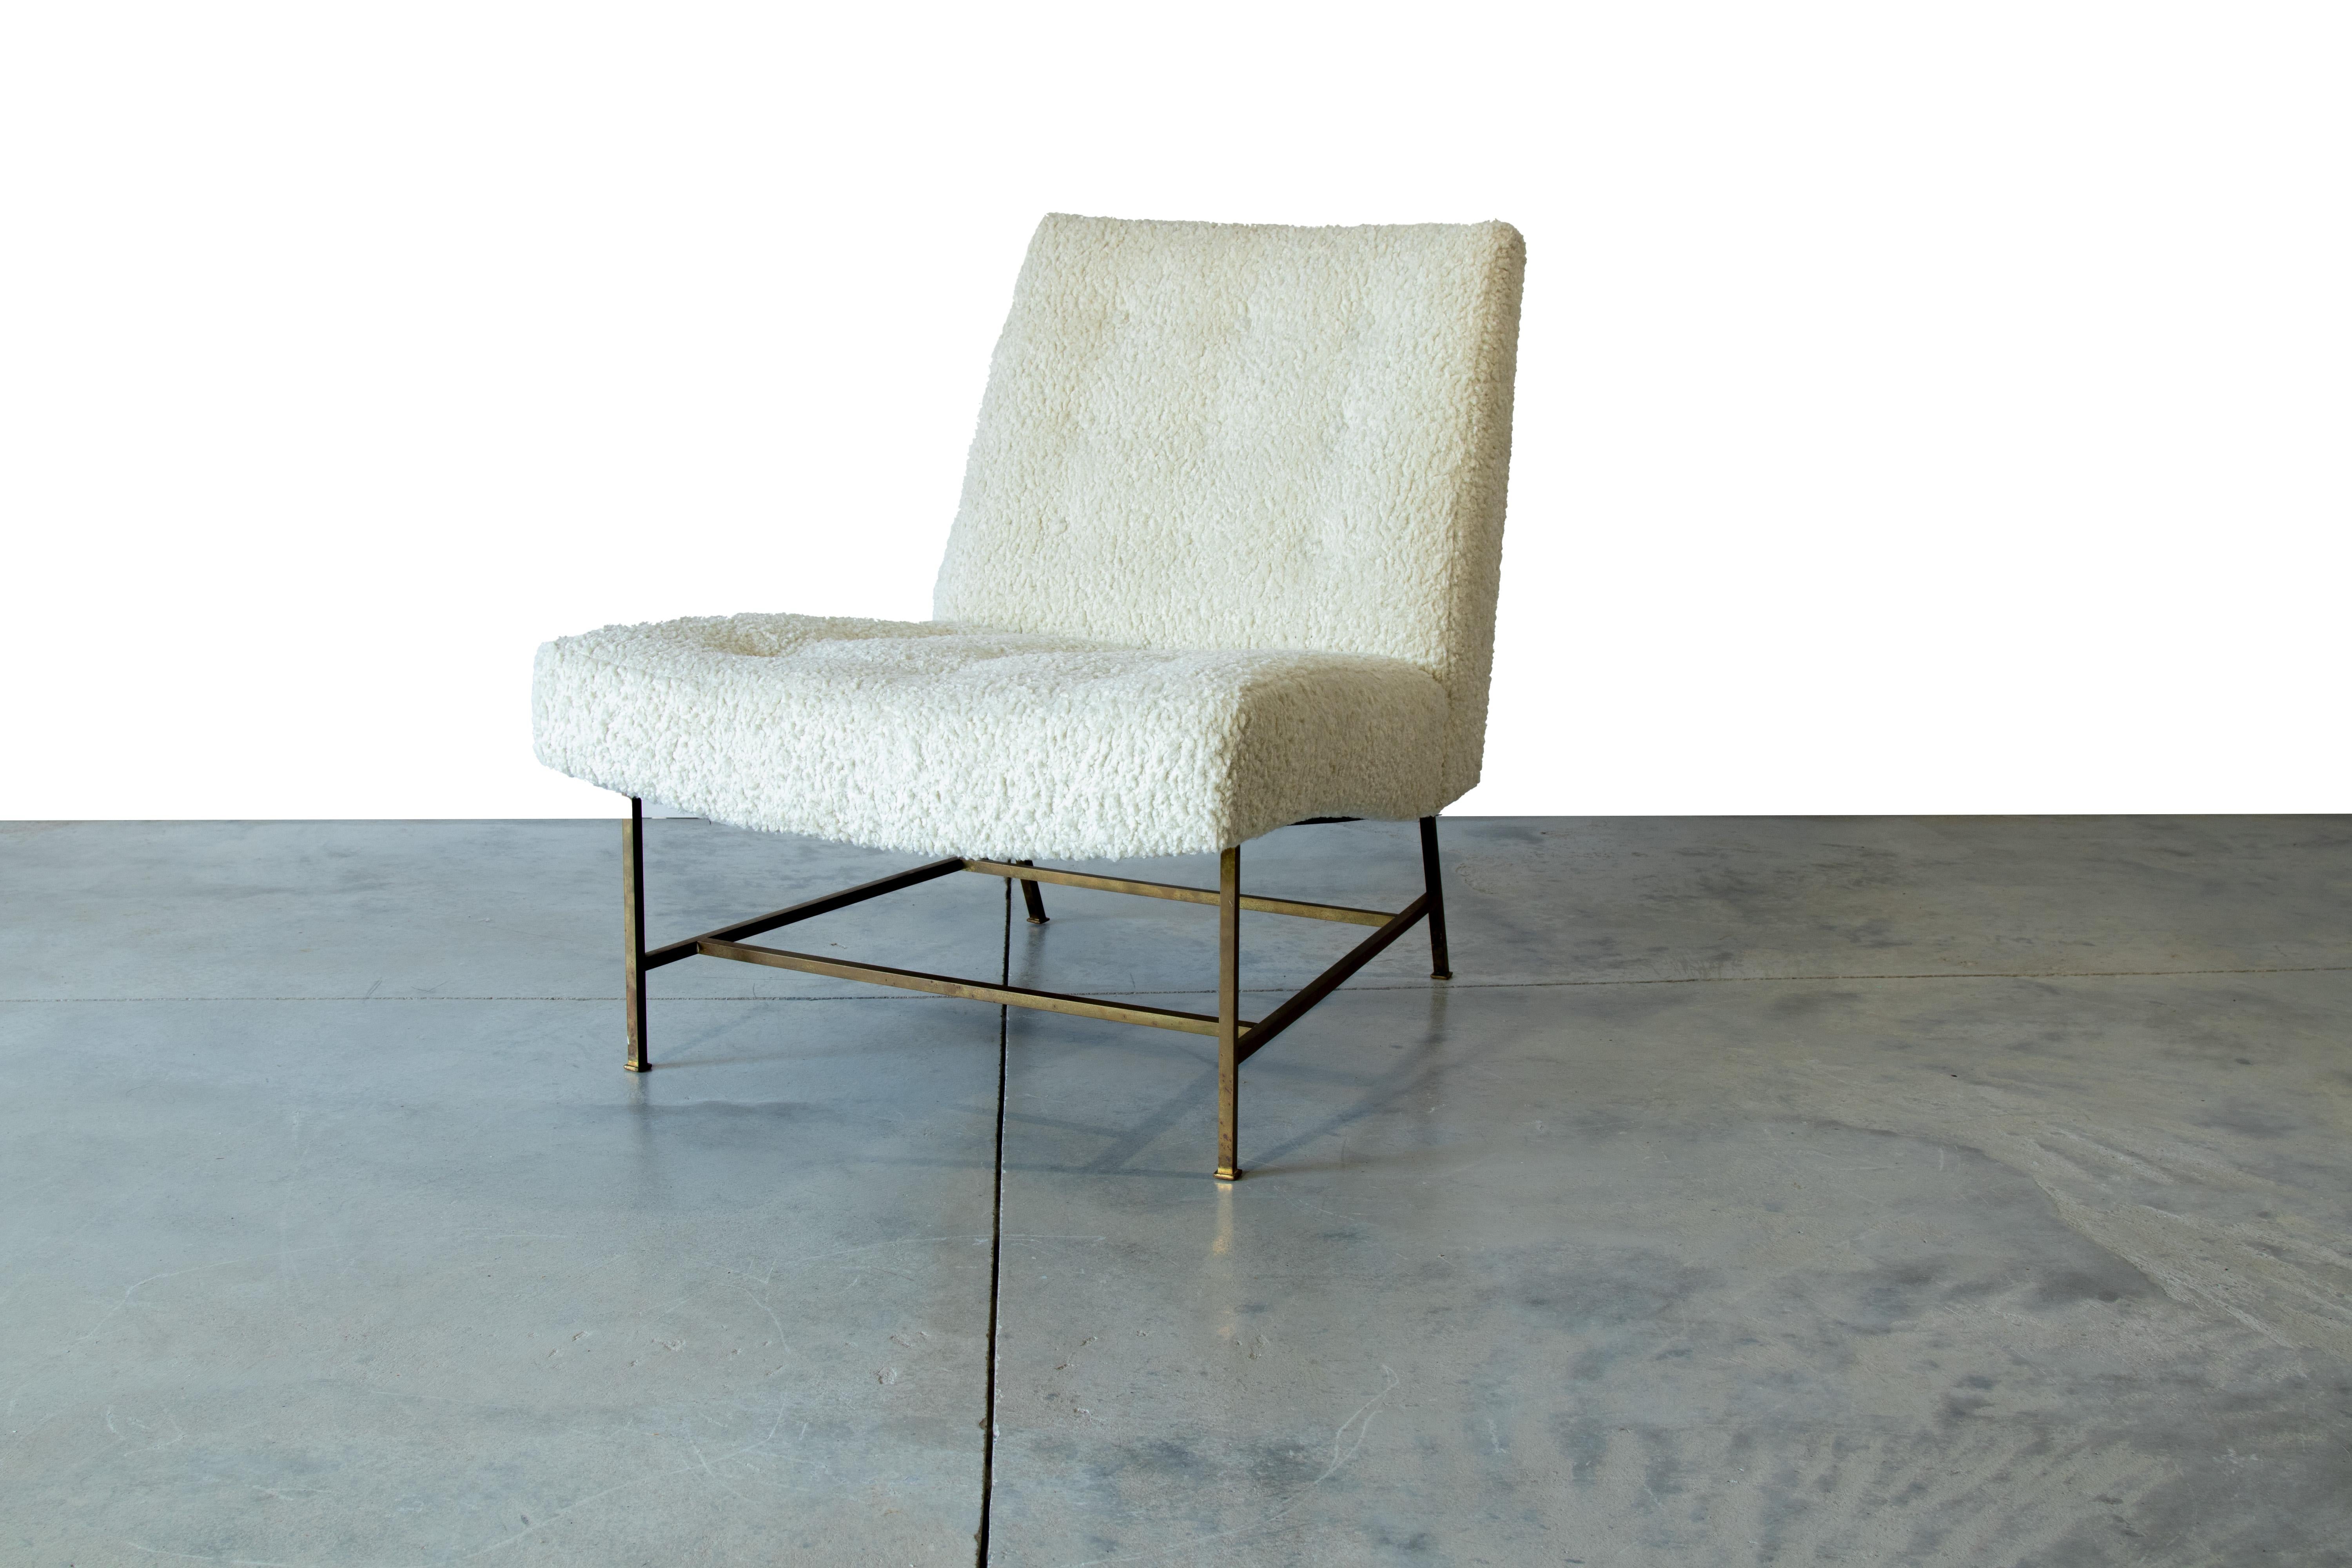 A rare offering from Harvey Probber.  Very few examples have surfaced of this chair.  Fully restored in white boucle with great curves floating on thin solid brass legs. 

Condition:

New fabric and upholstery restored to original specifications